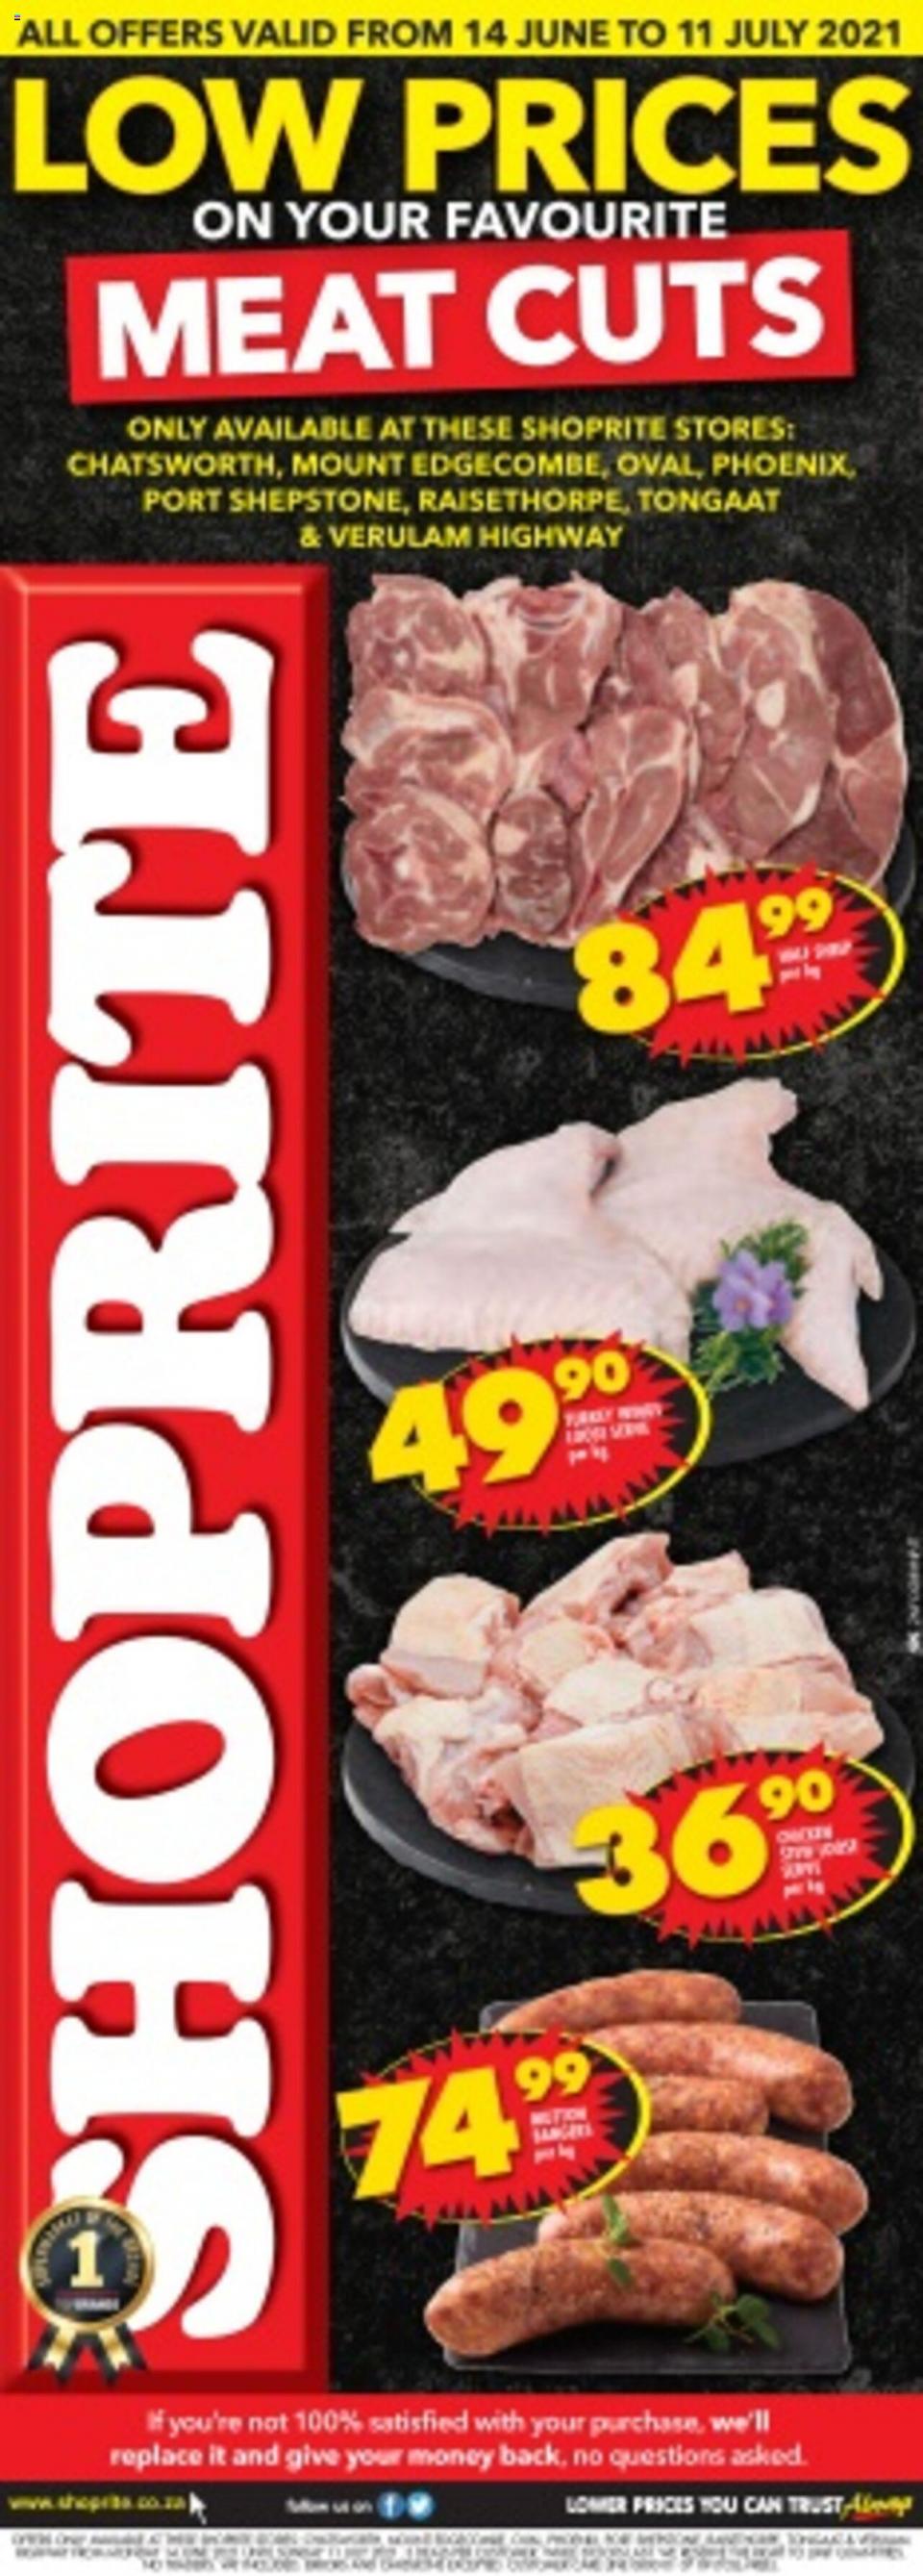 Shoprite Specials Low Prices On Meat Cuts 14 Jun – 11 Jul 2021